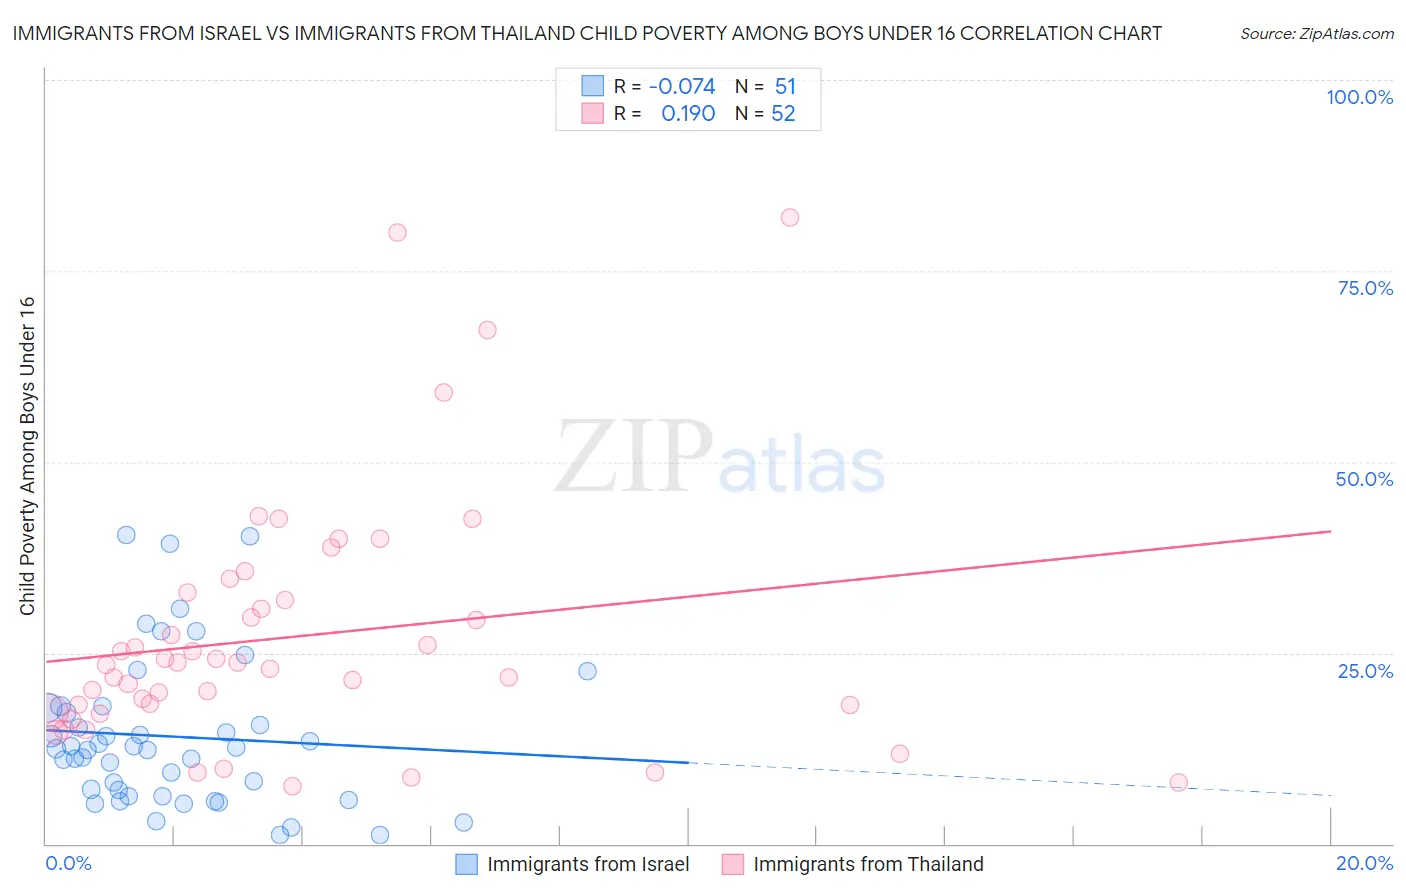 Immigrants from Israel vs Immigrants from Thailand Child Poverty Among Boys Under 16